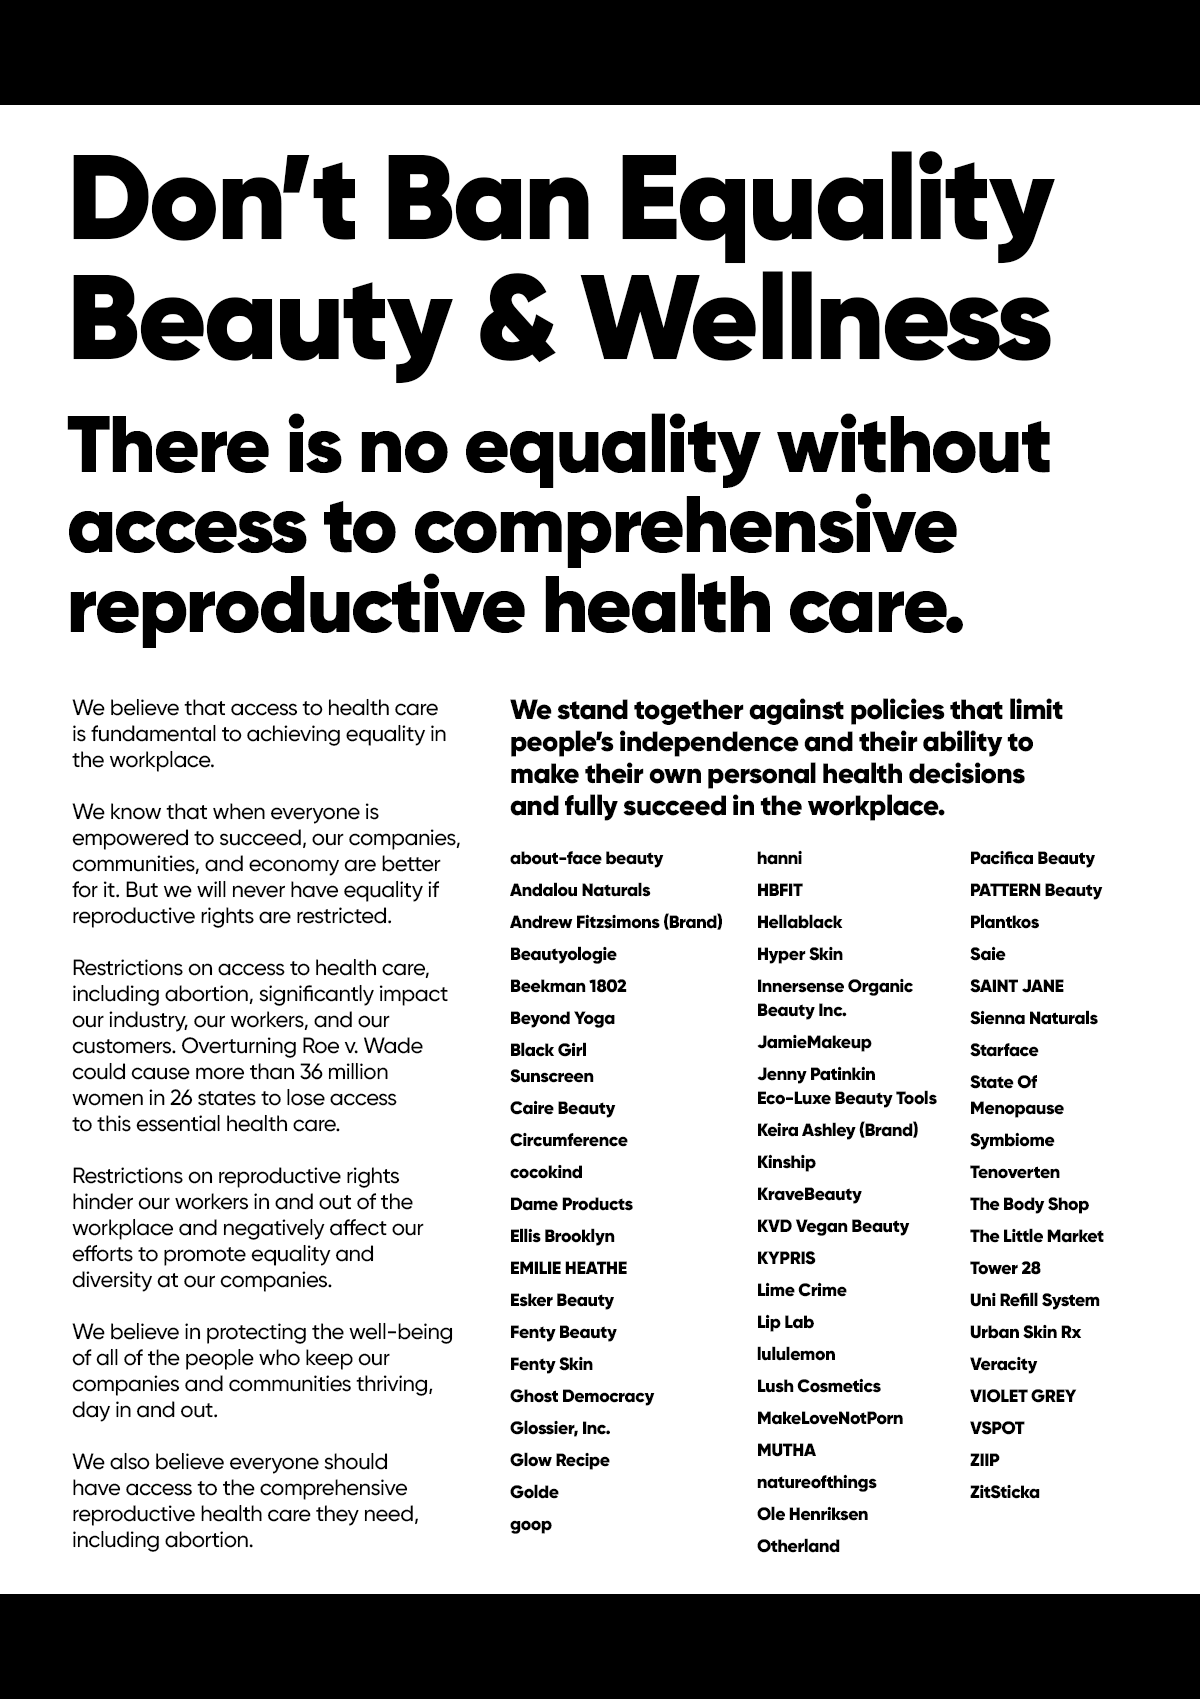 62 beauty and wellness brands join the Don’t Ban Equality coalition in support of abortion rights